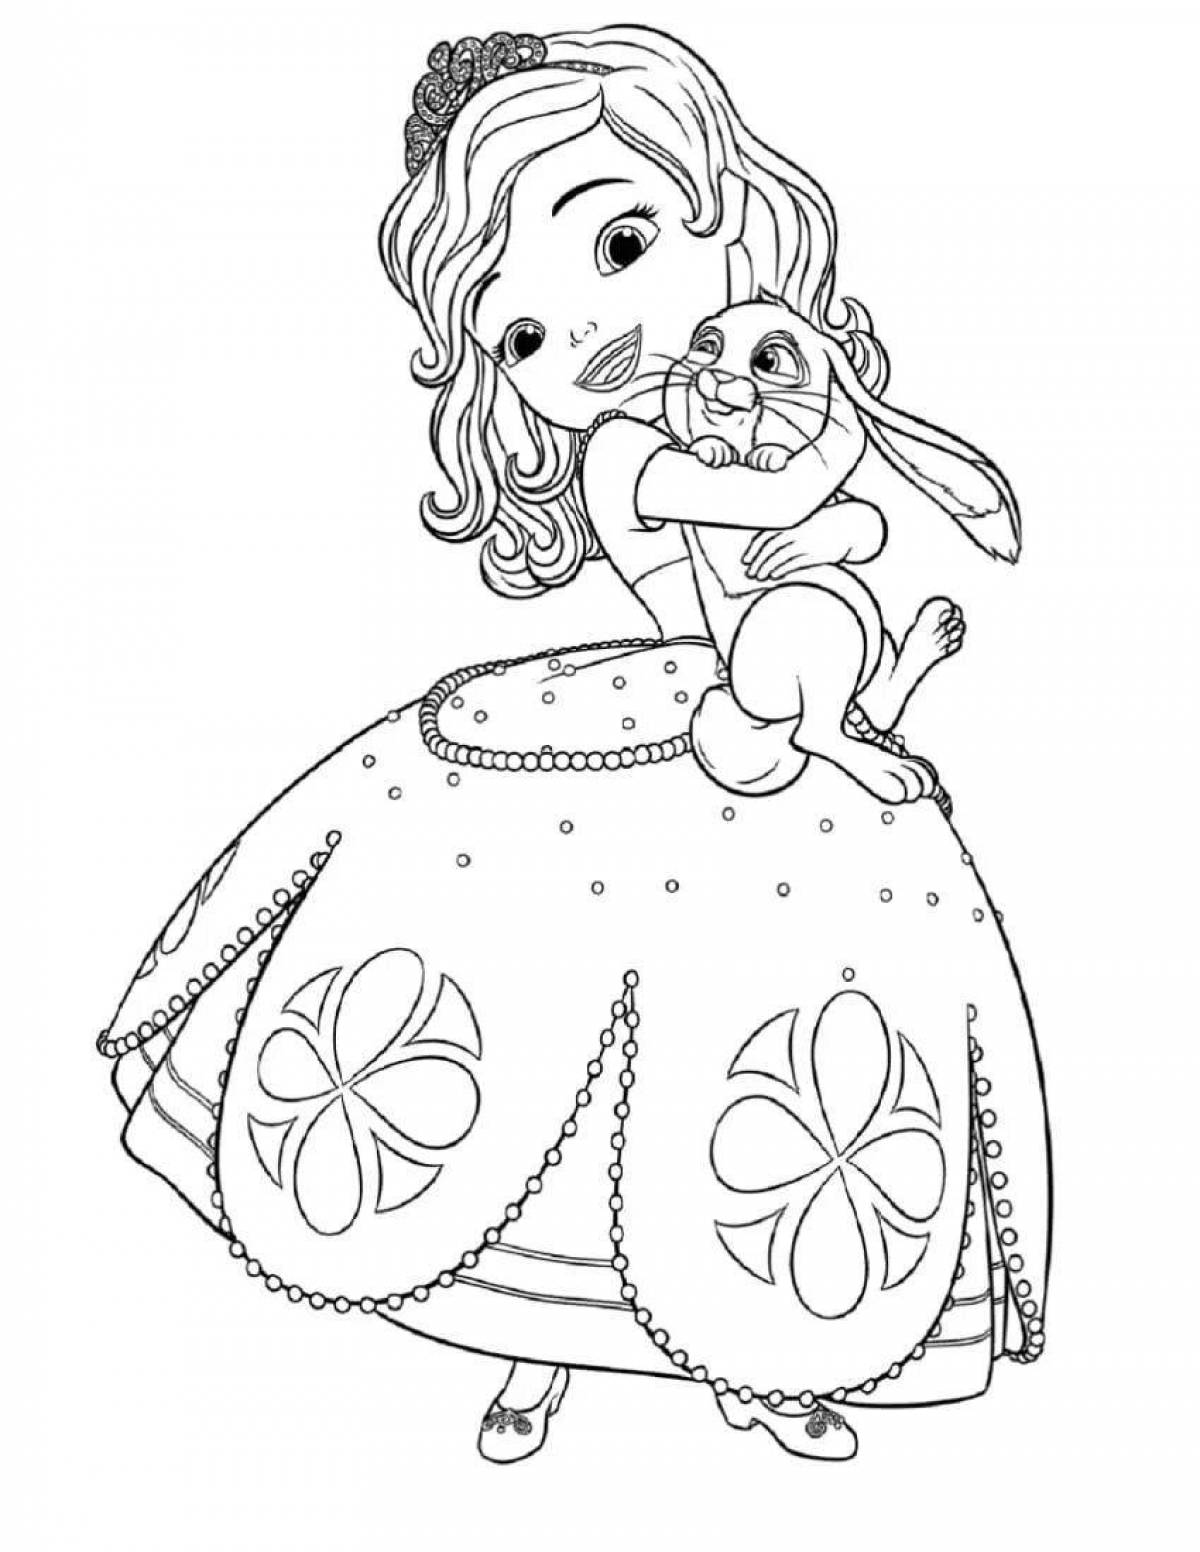 Amazing princess coloring pages for girls 4 years old